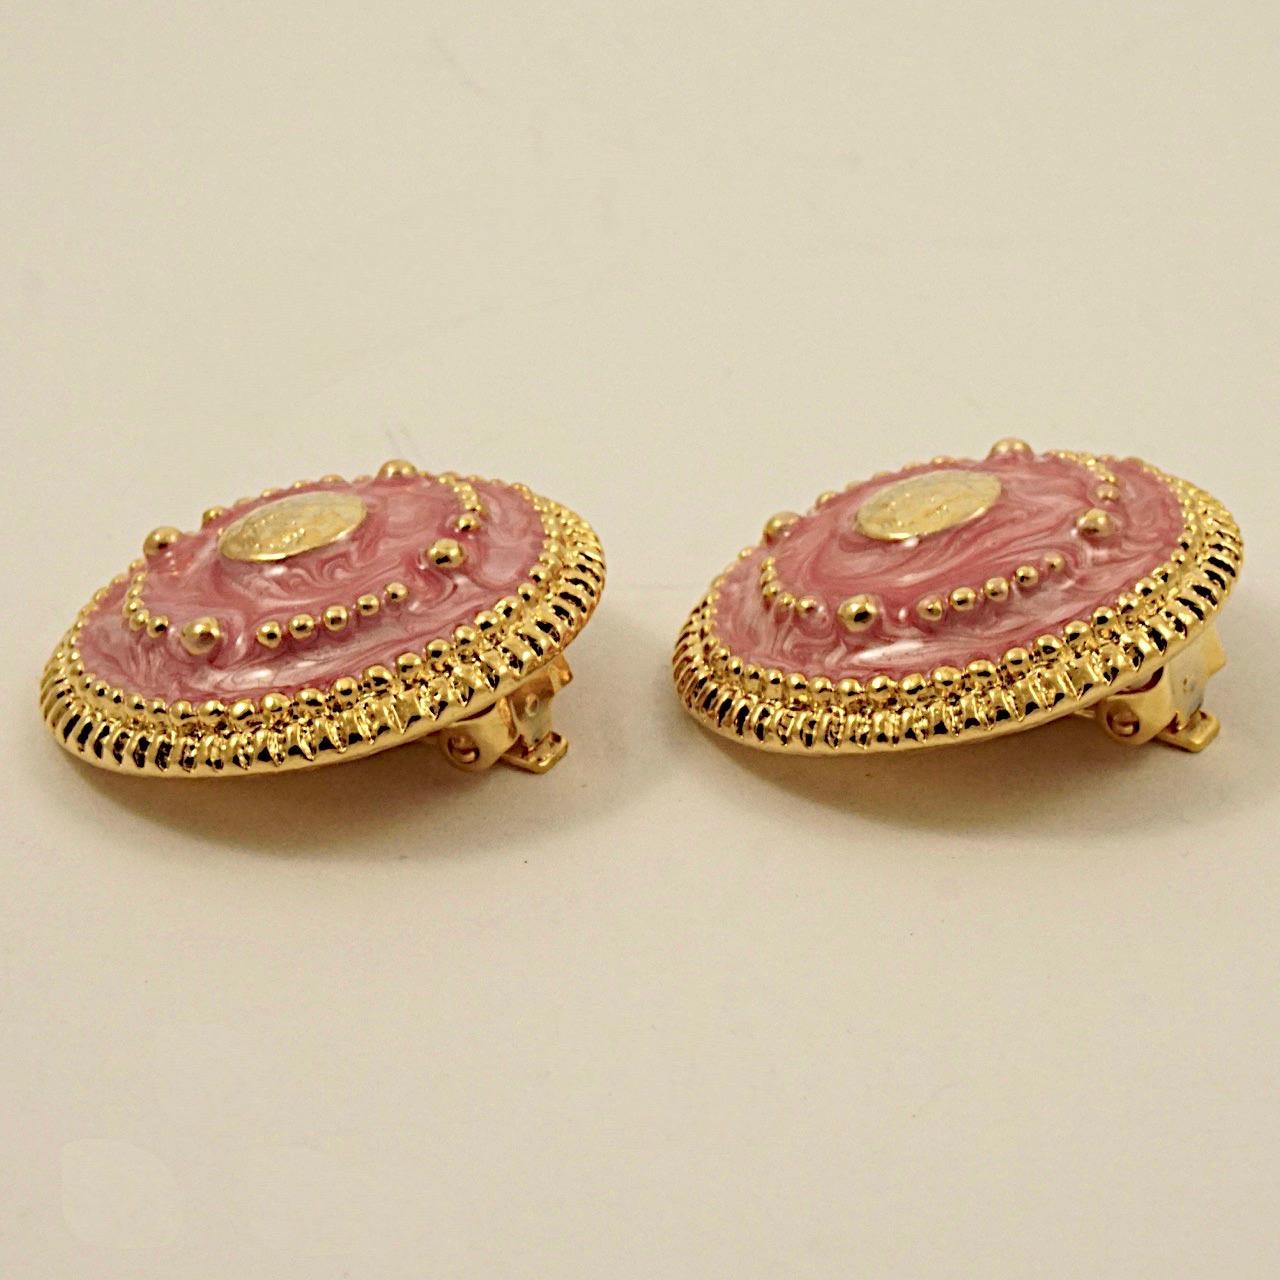 Gold Plated and Pink Enamel Clip On Earrings circa 1980s In Excellent Condition For Sale In London, GB